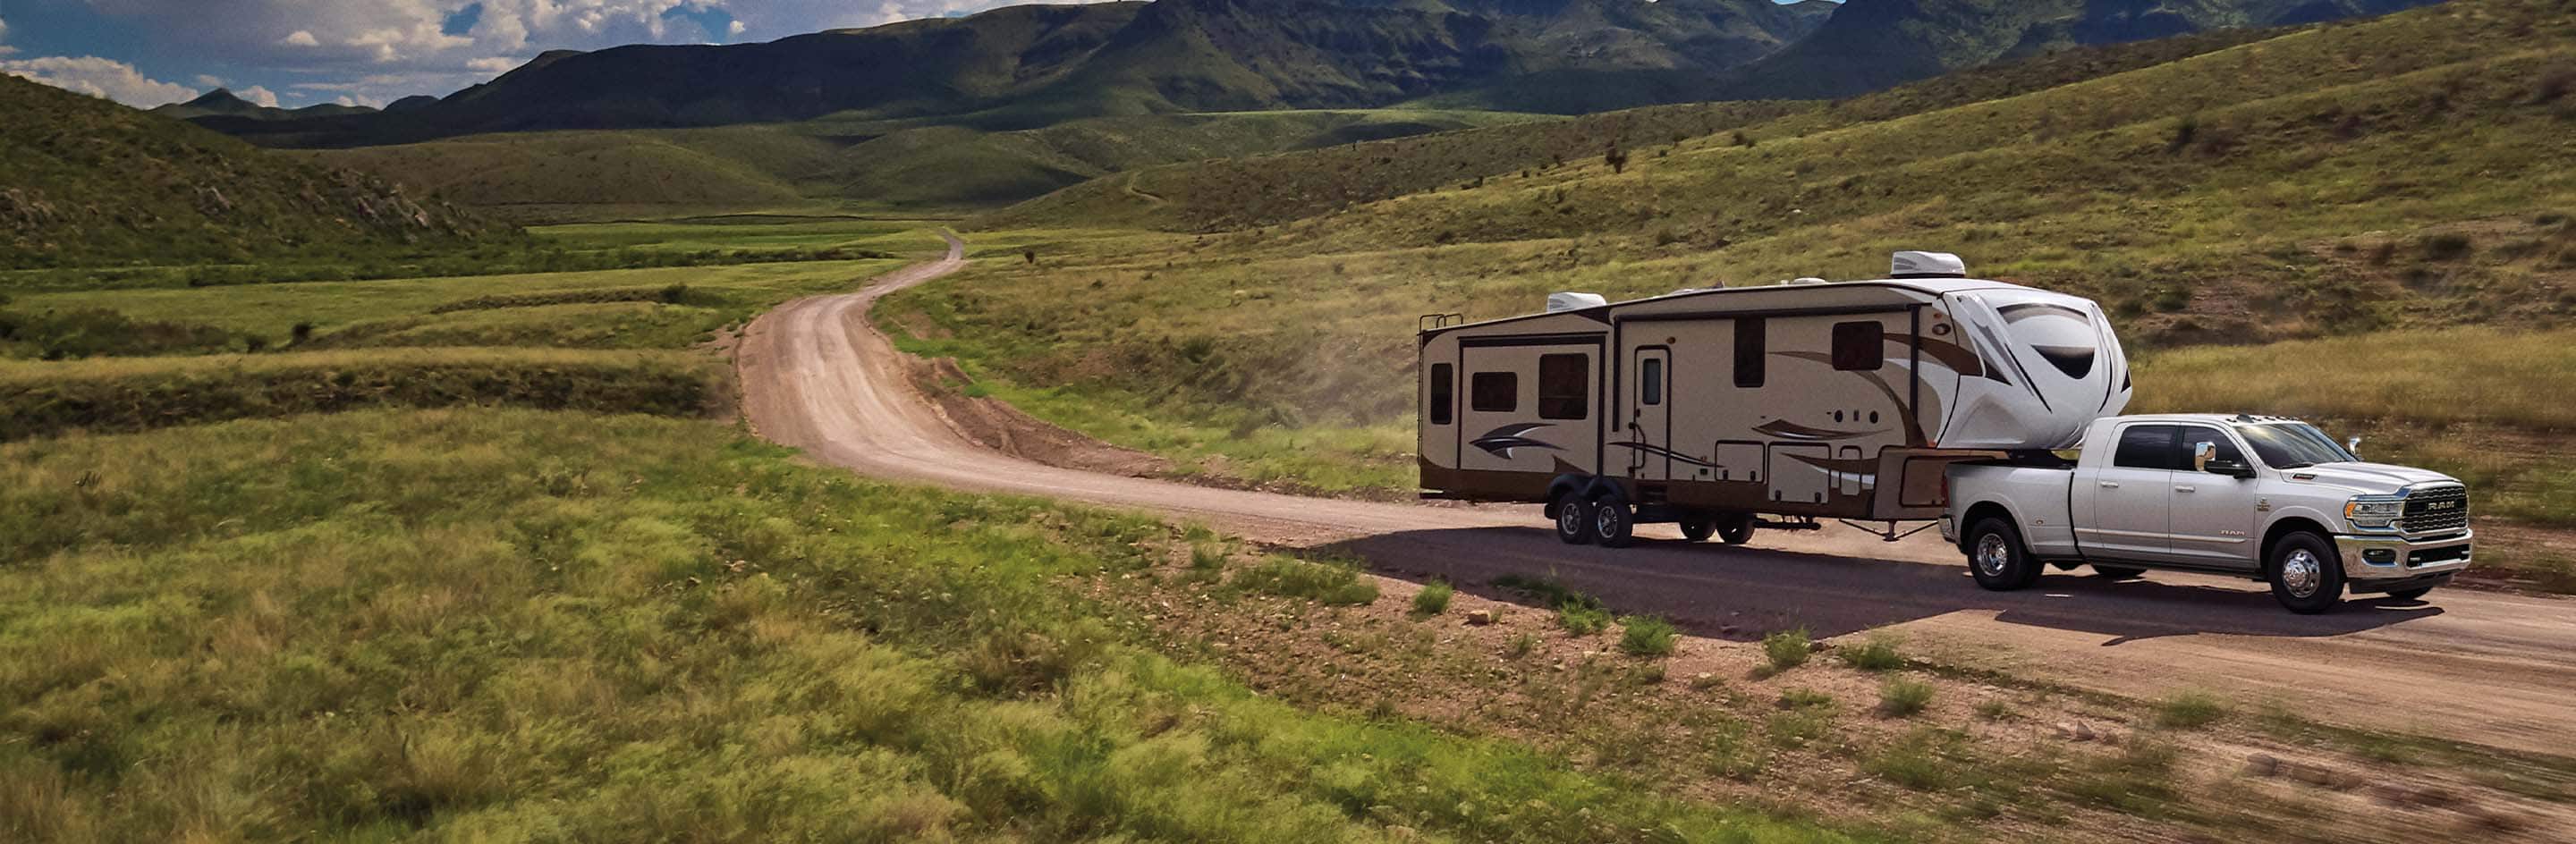 The 2021 Ram 3500 towing a large RV trailer.